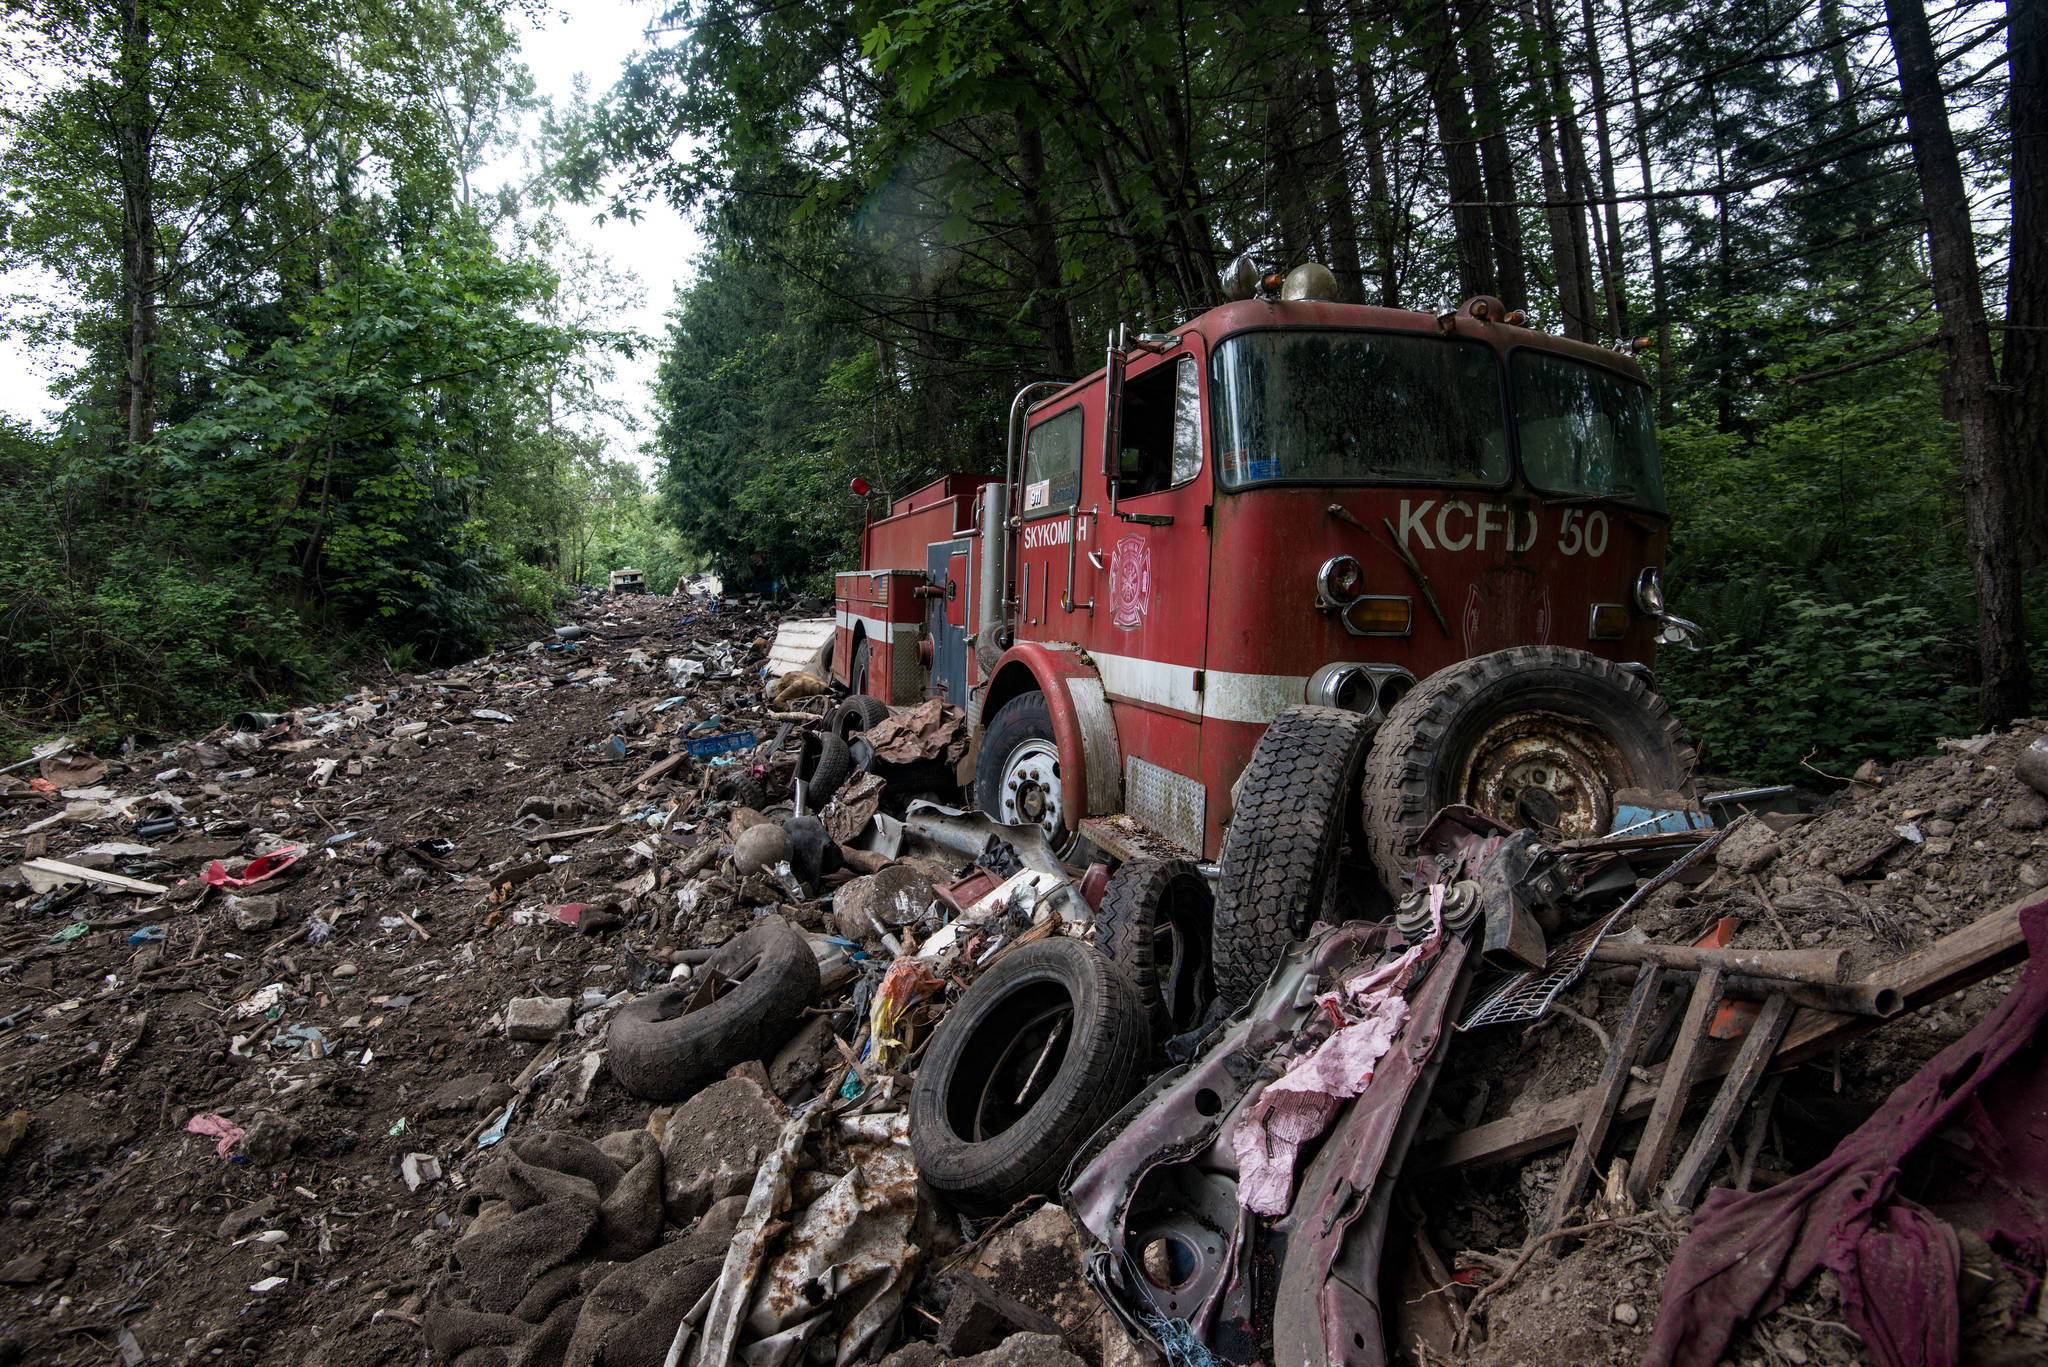 An old Skykomish Fire Engine sits amongst rubble. The pathway it sits on is riddled with tires and broken debris from other vehicles, whereas other areas are more clear of broken scrap. Photo by Caean Couto